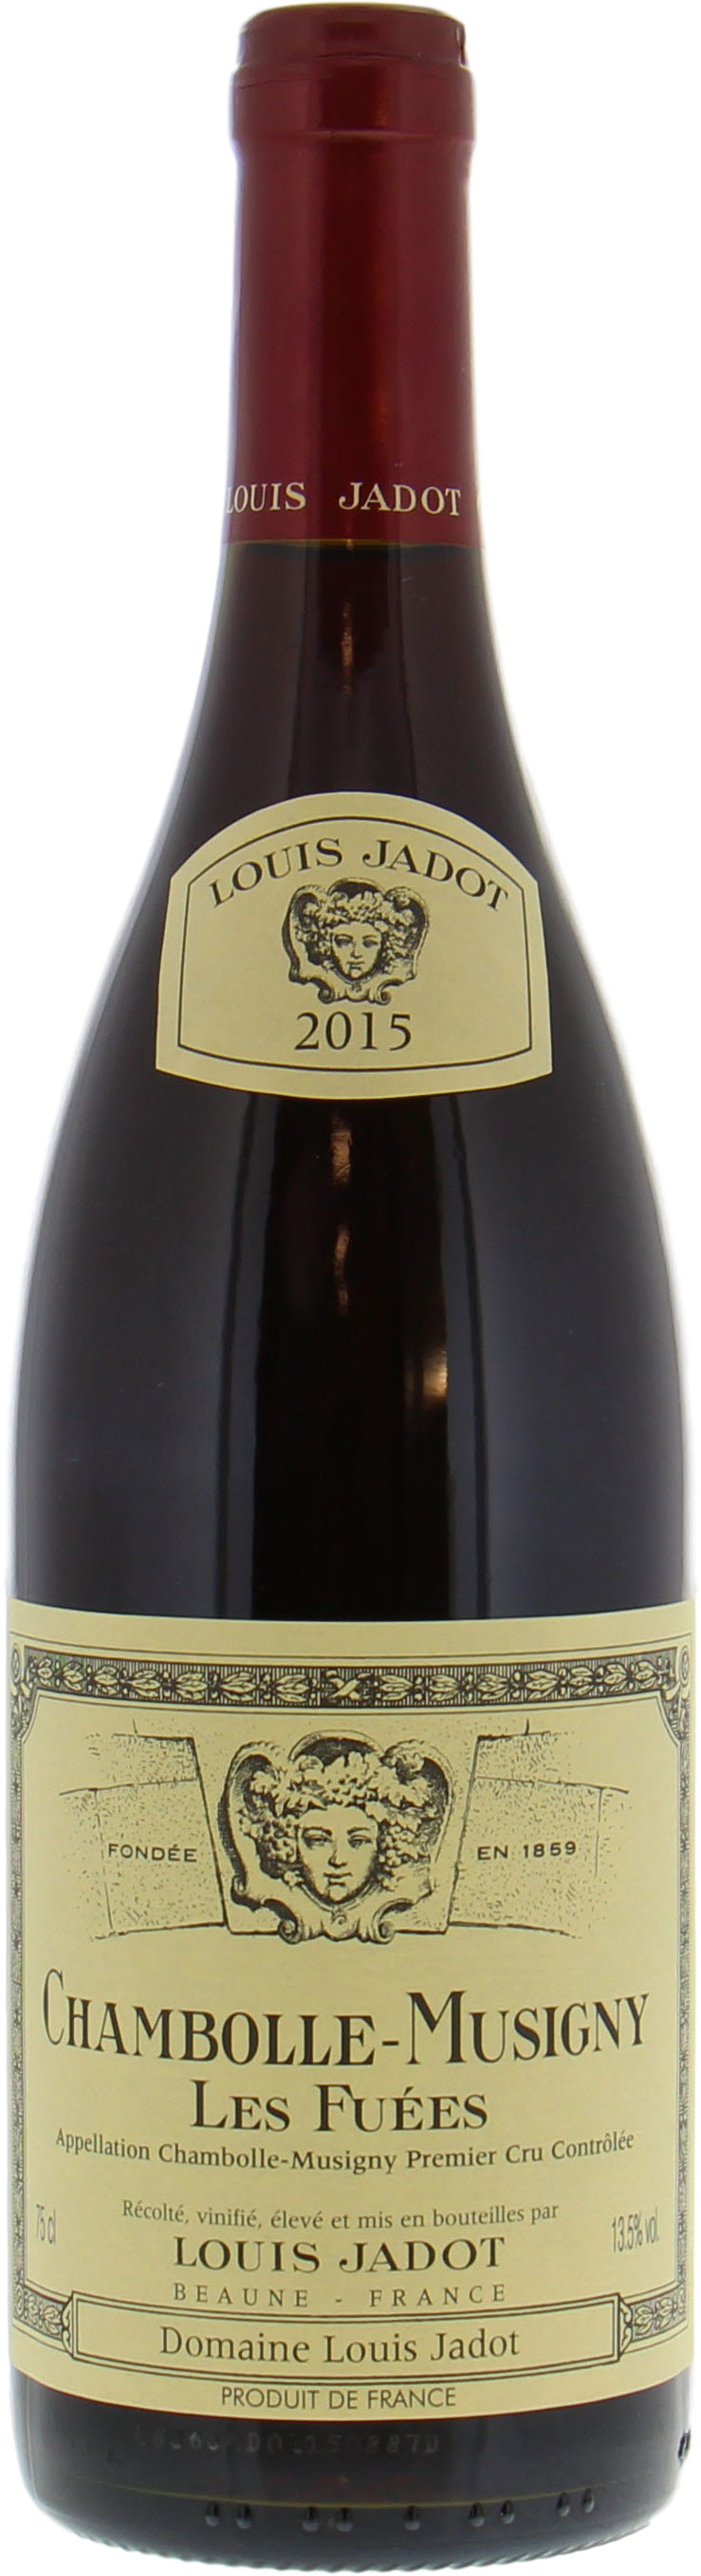 Jadot - Chambolle Musigny les Fuees 2015